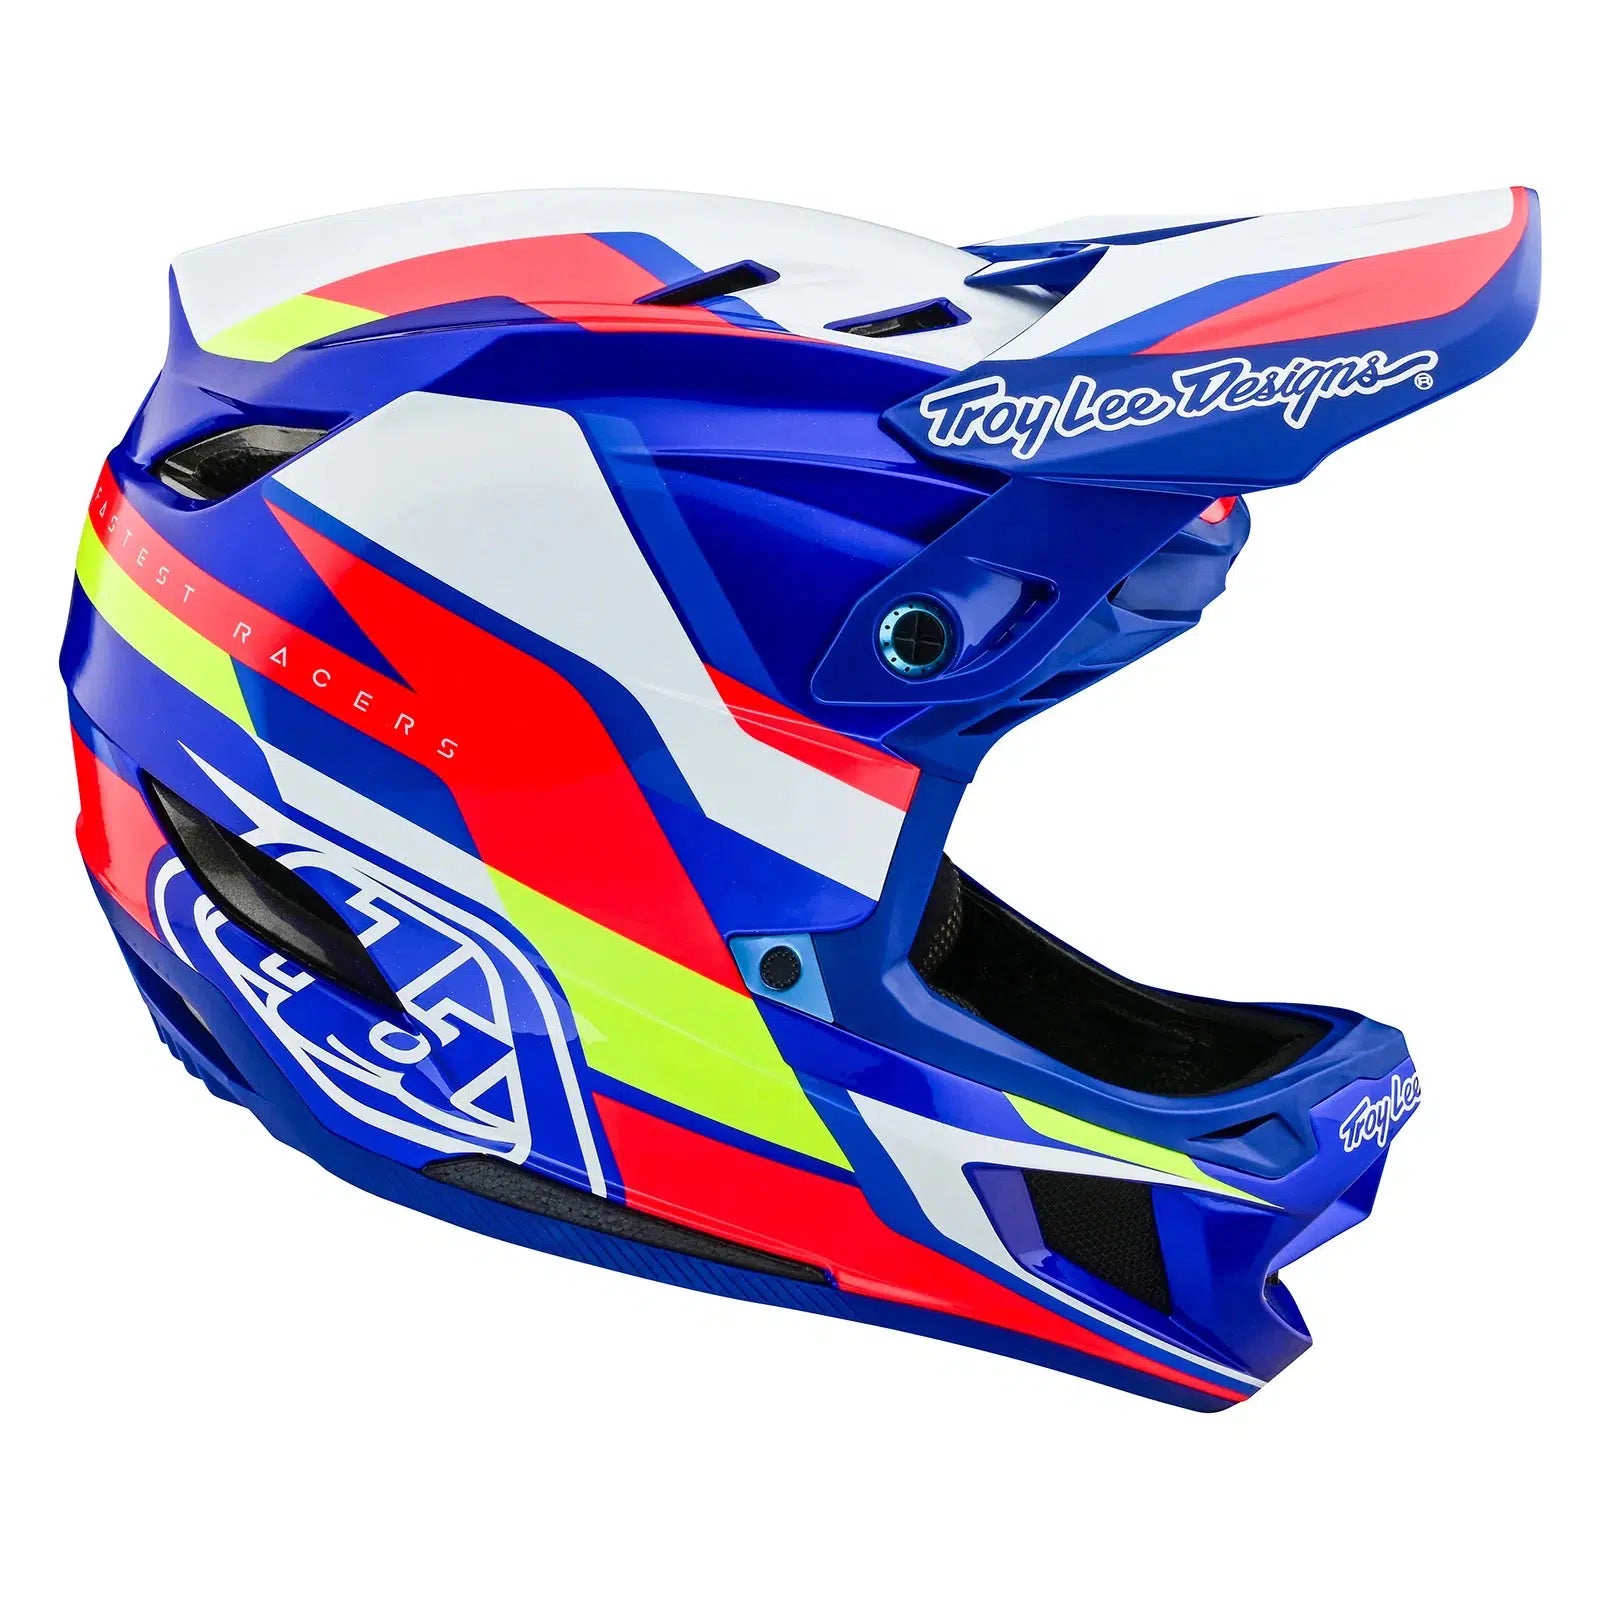 A lightweight TLD D4 AS Composite Helmet W/MIPS Omega Blue / White featuring the Mips protection system.